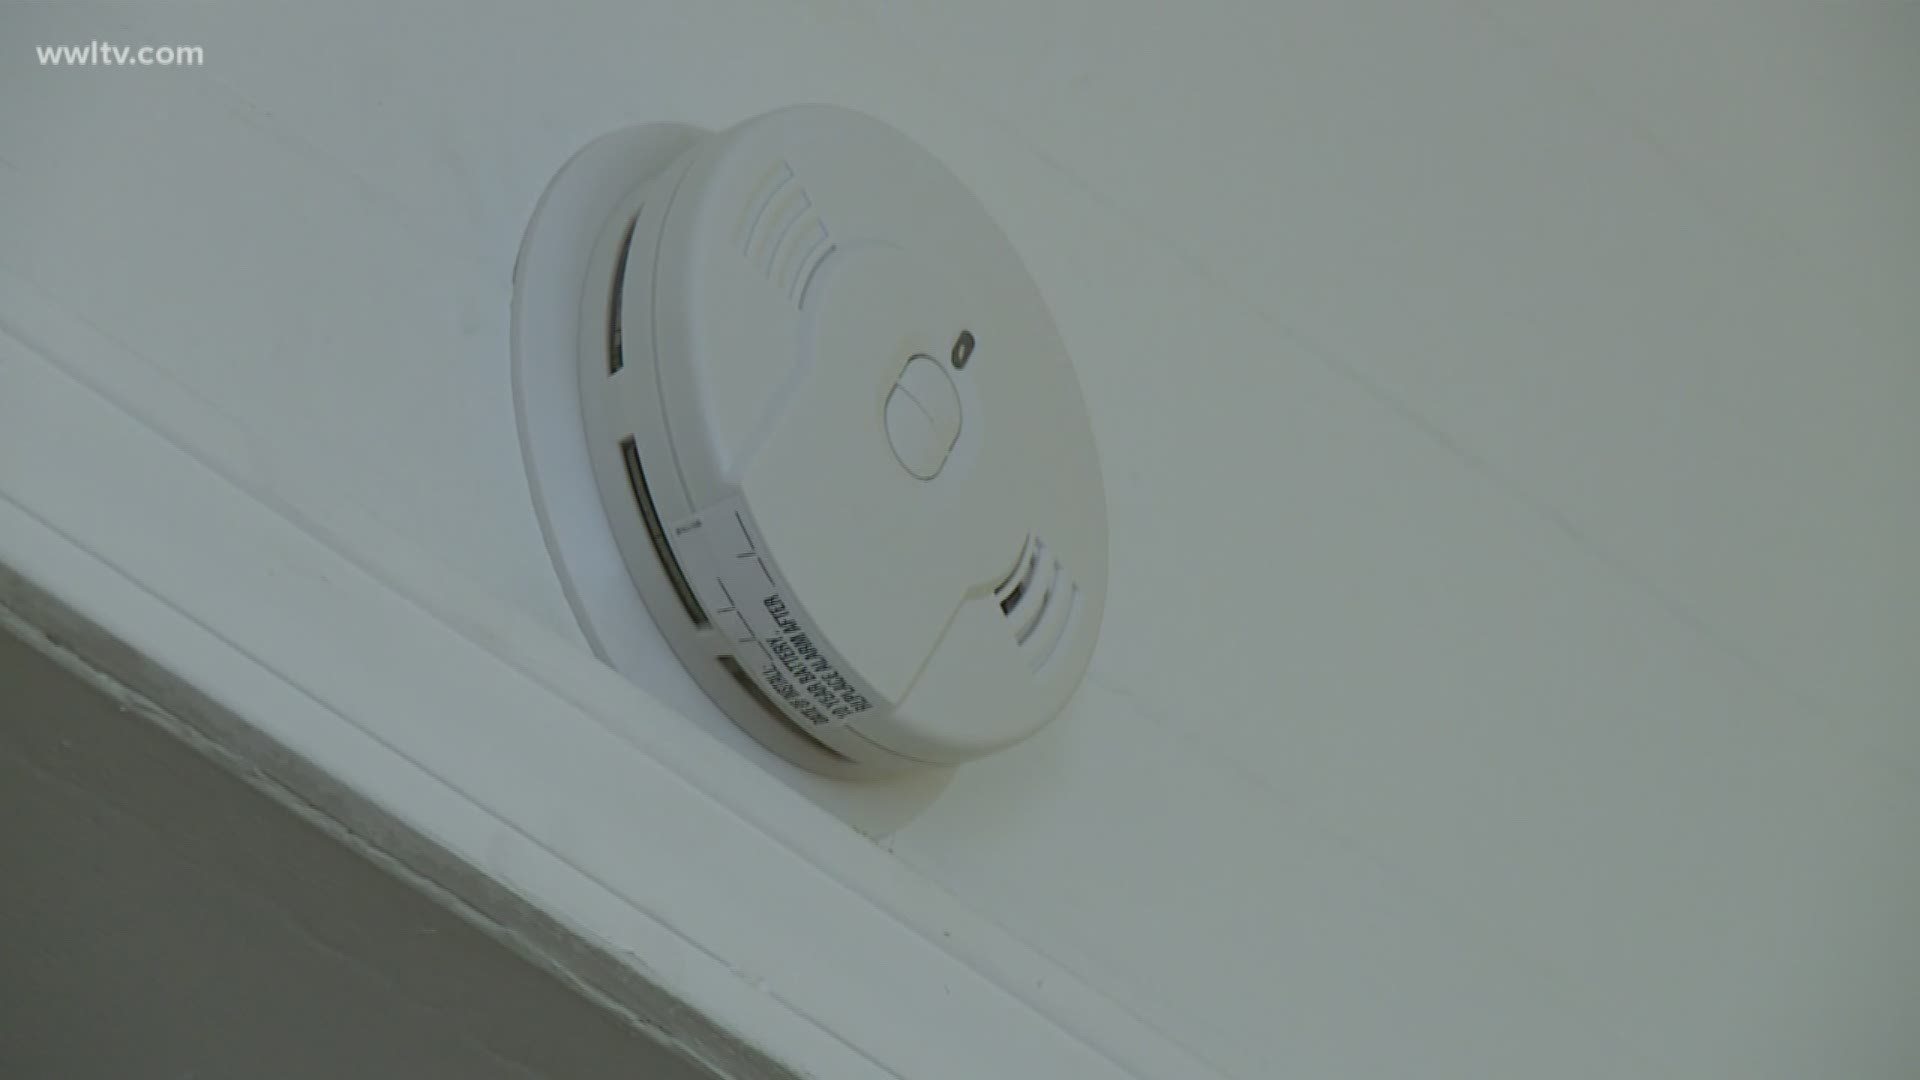 If you would like free smoke alarms installed in your home call the NOFD at (504) 658-4714. 